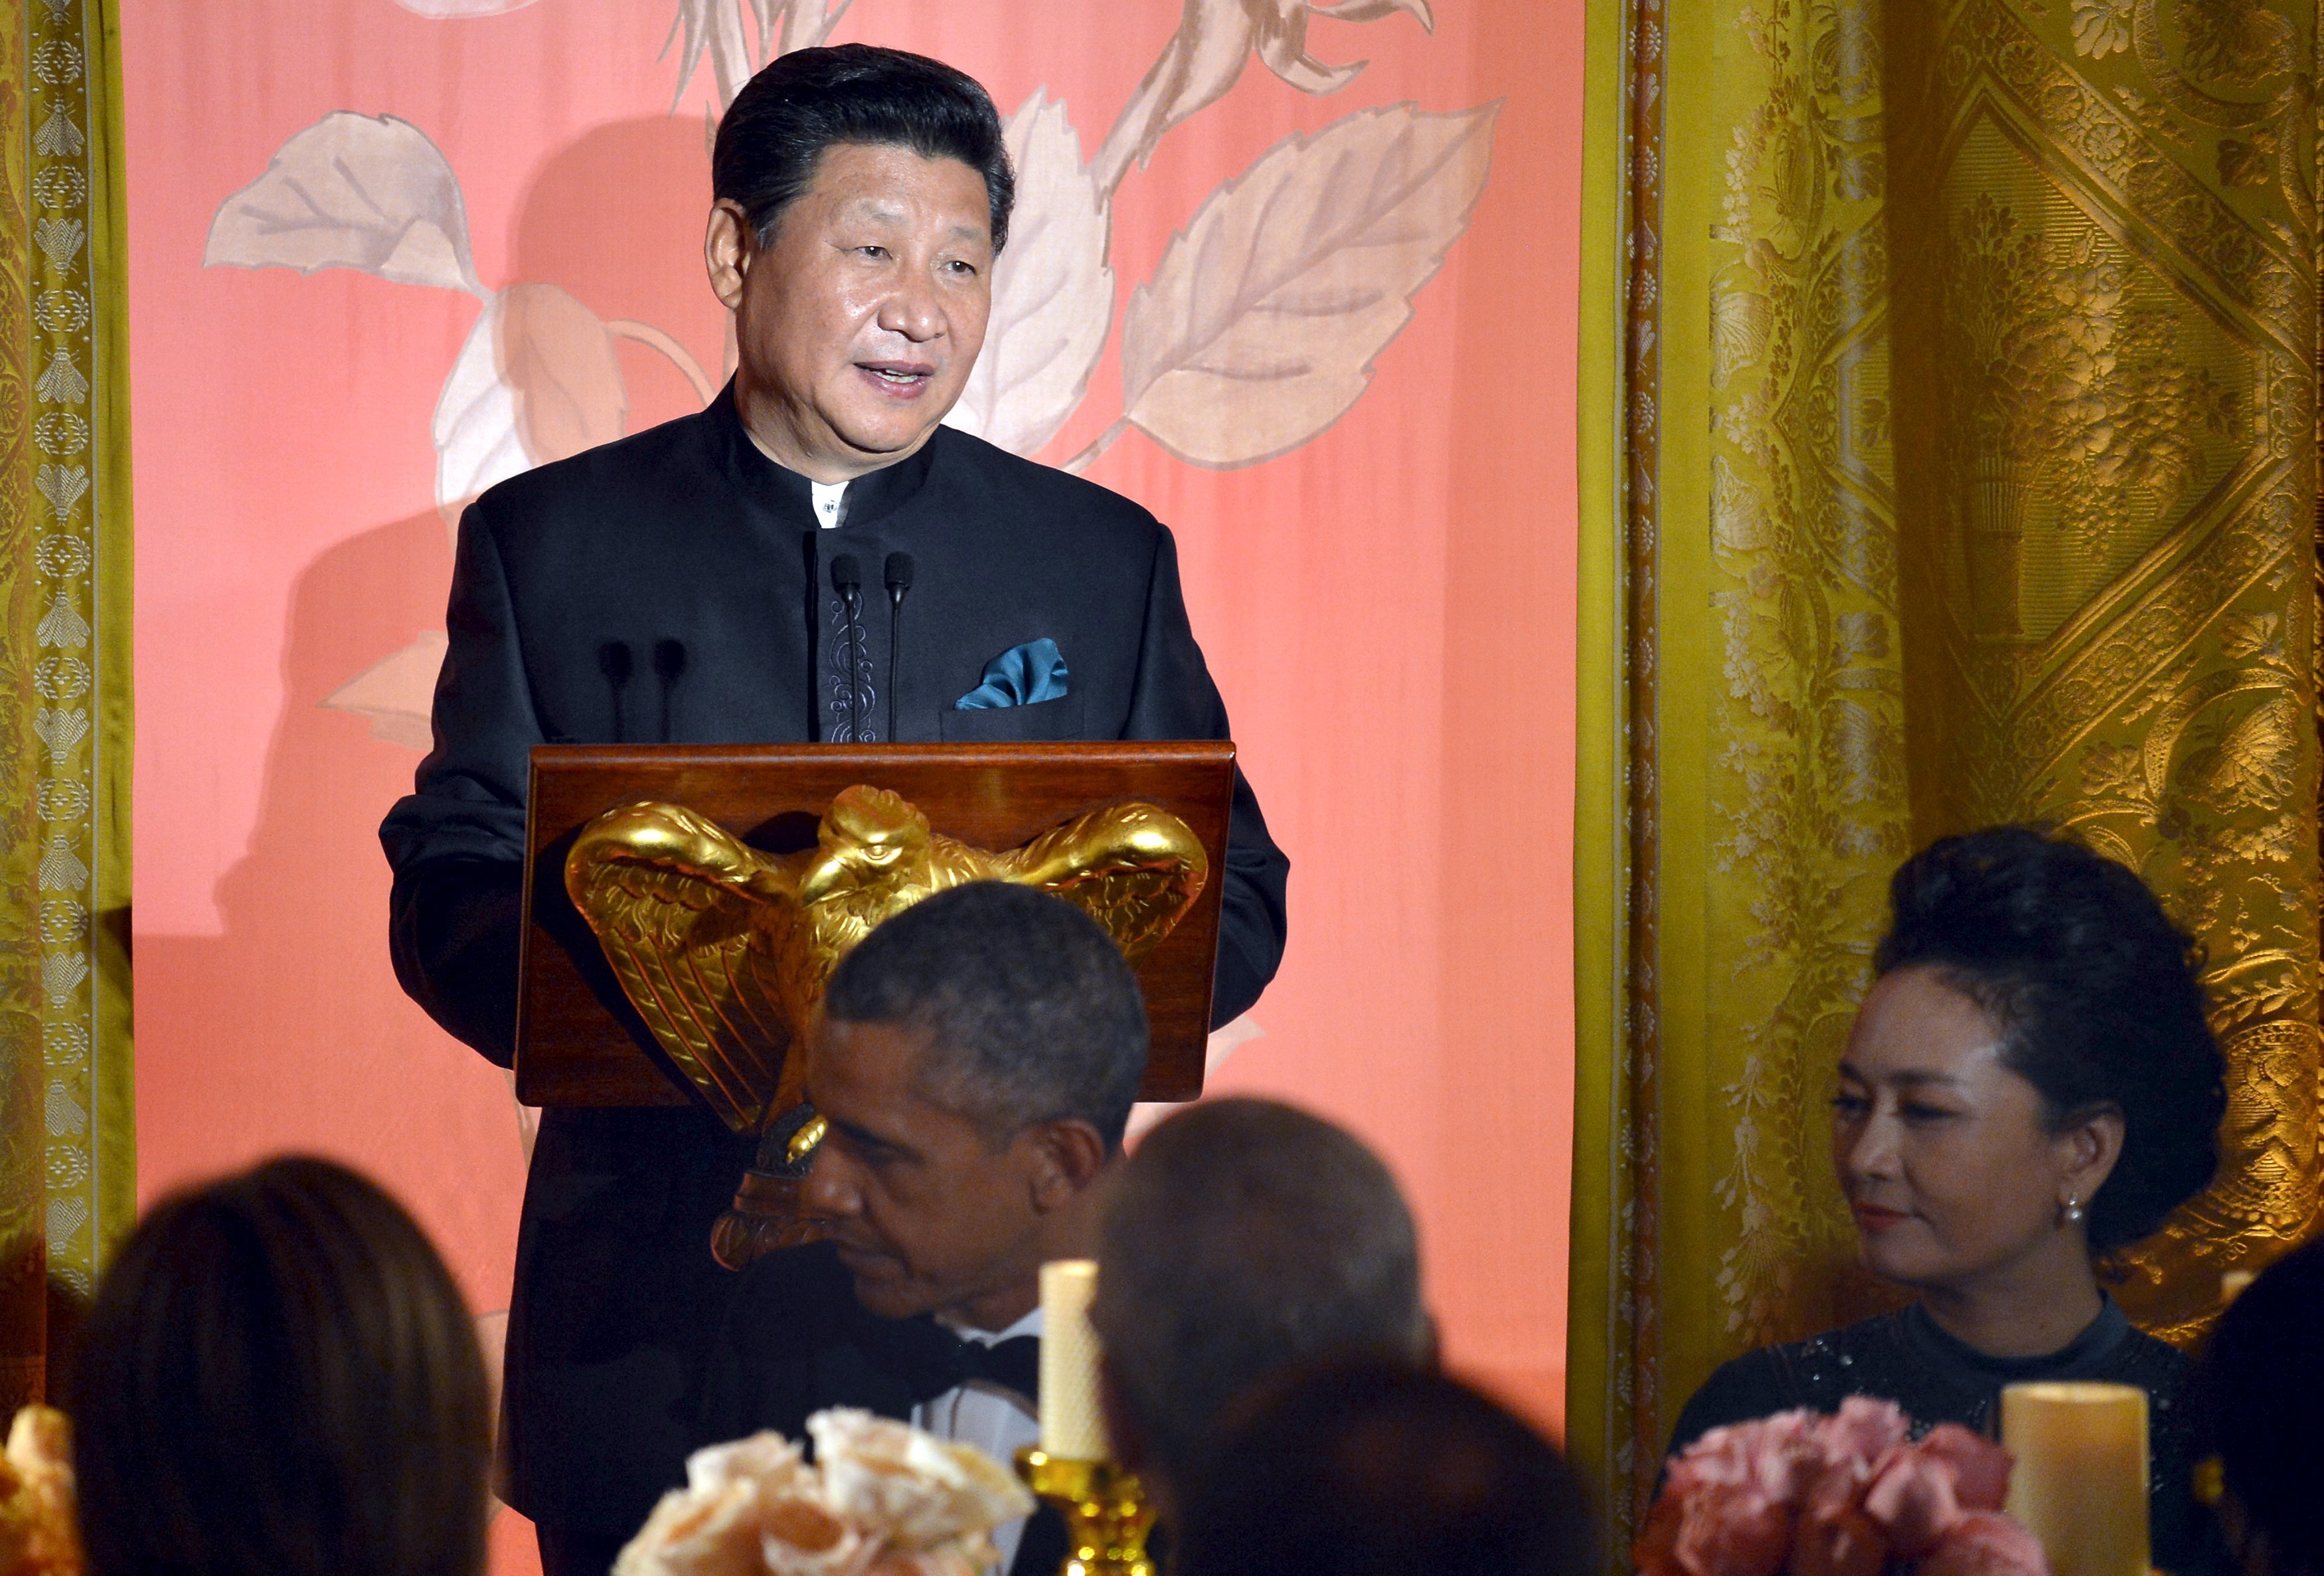 Chinese President Xi Jinping speaks as his wife Madame Peng Liyuan and US President Barack Obama listen during a state dinner at the White House in Washington on Friday. Photo: Reuters